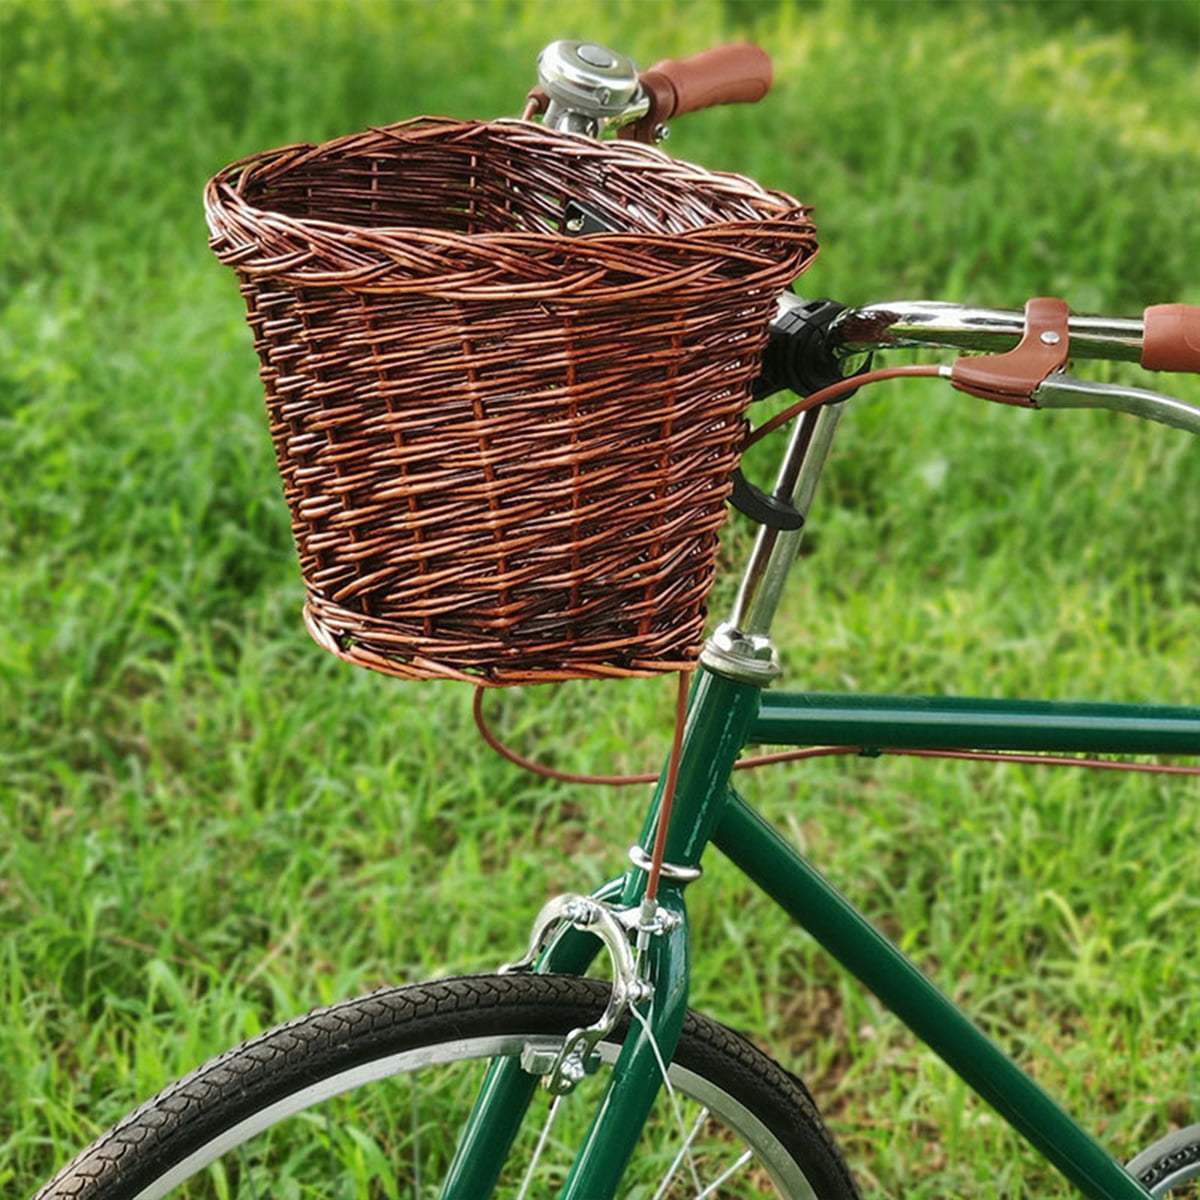 Willow Handwoven Woven Basket Front Handlebar Bike Basket with Leather Strap for Type Bicycles Teen or Adult Cycling Accessories Rattan Bicycle Basket 